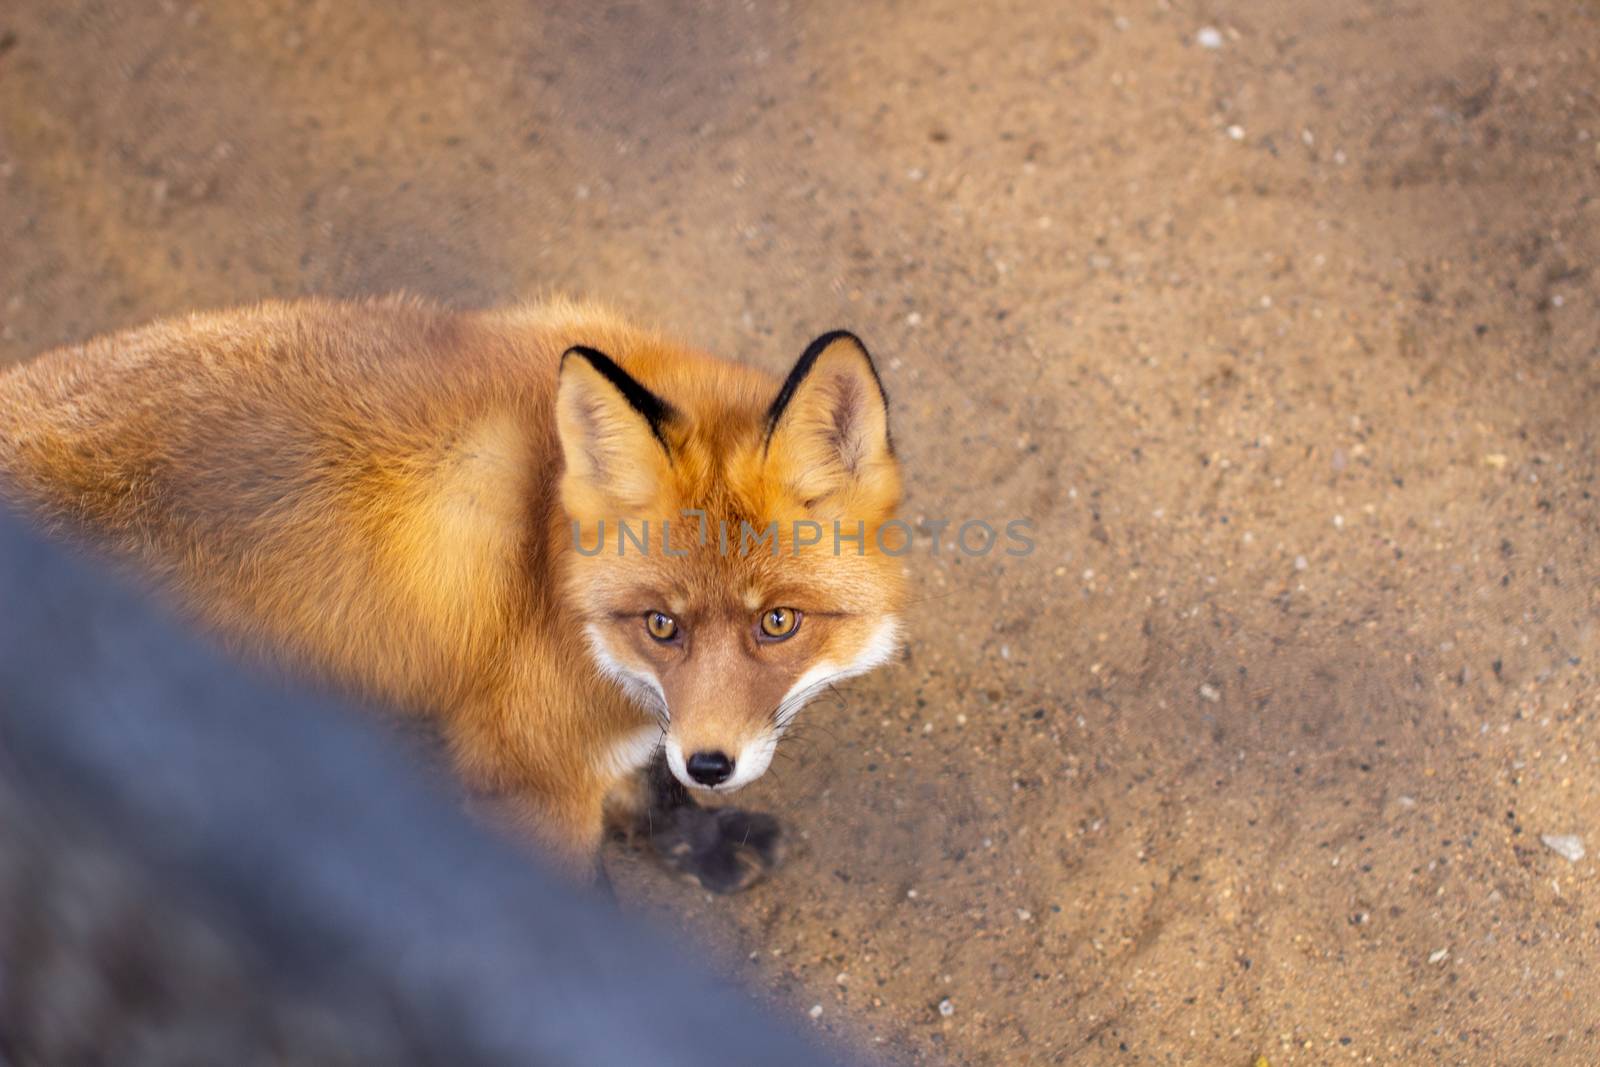 Wild red Fox sitting in a cage at the zoo. High quality photo